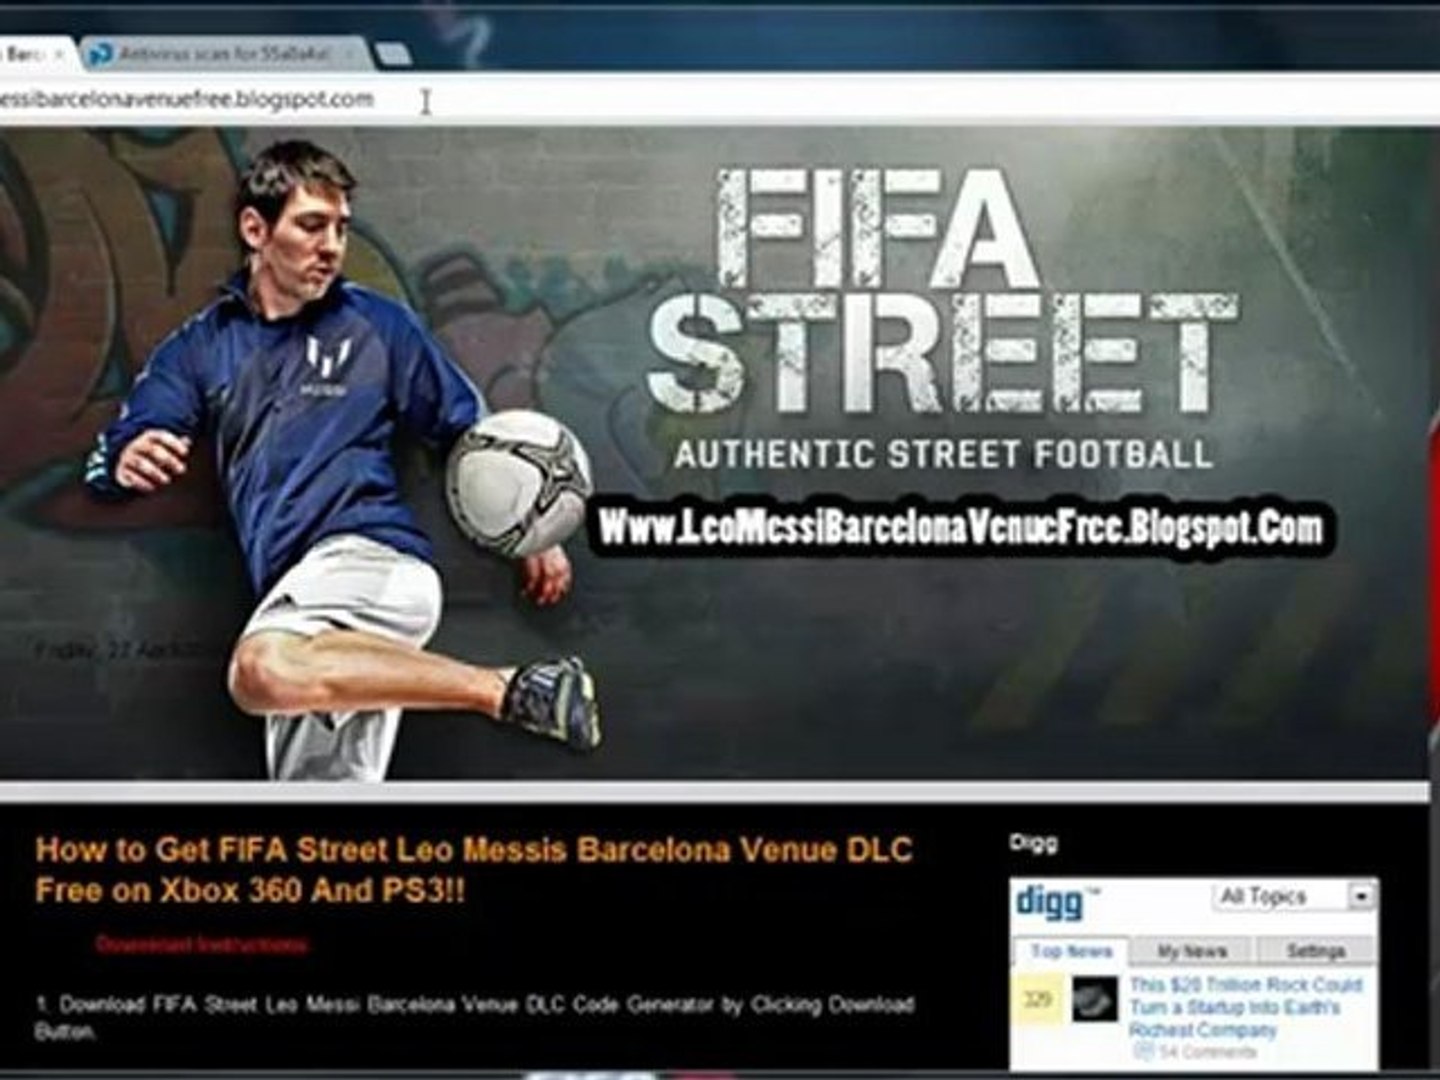 How To Download FIFA Street 2012 Leo Messi Barcelona Venue DLC For  PC,xbox360,PS3 - video Dailymotion